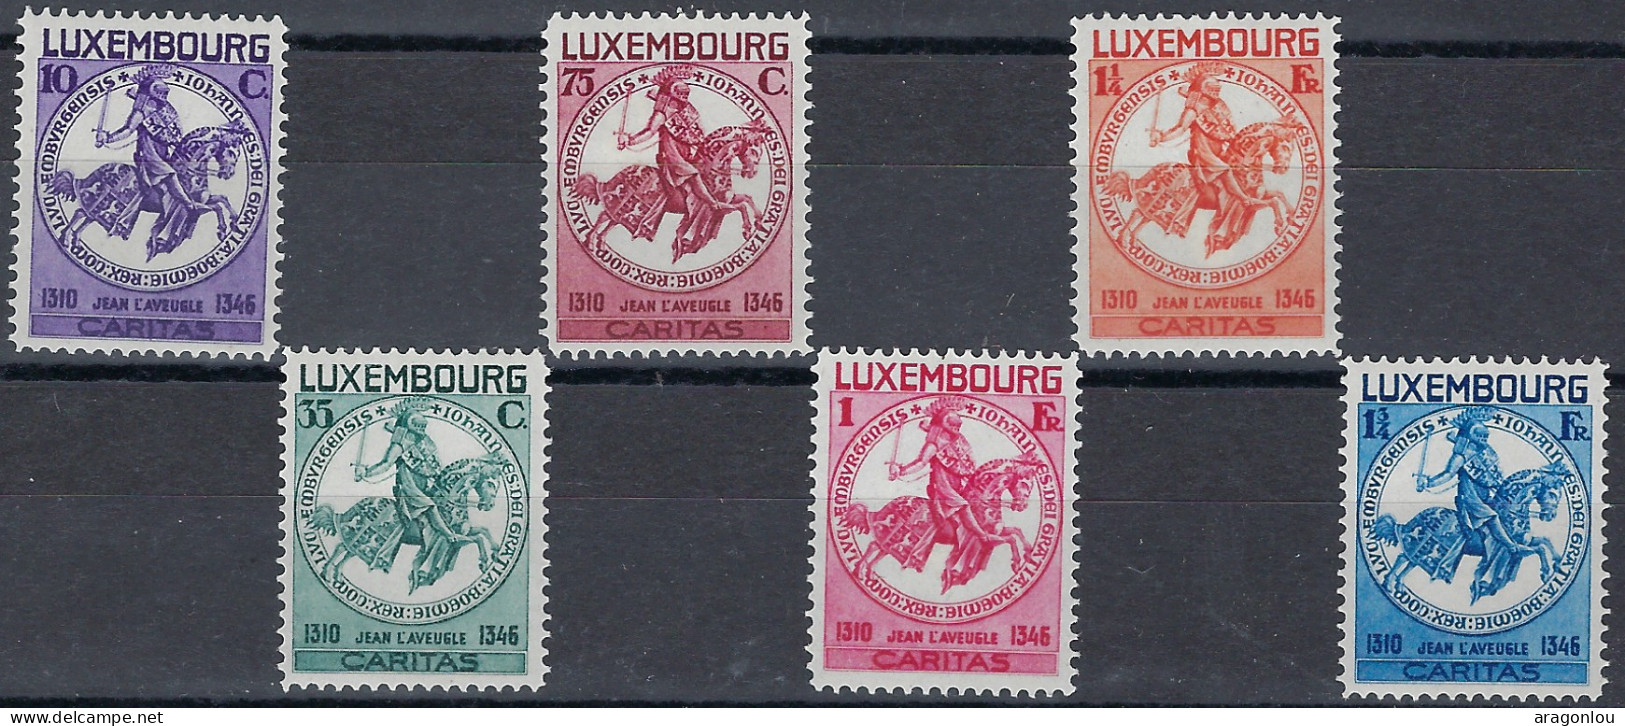 Luxembourg - Luxemburg - Timbres - 1934   Jean L'Aveugle   Série  * - Usados